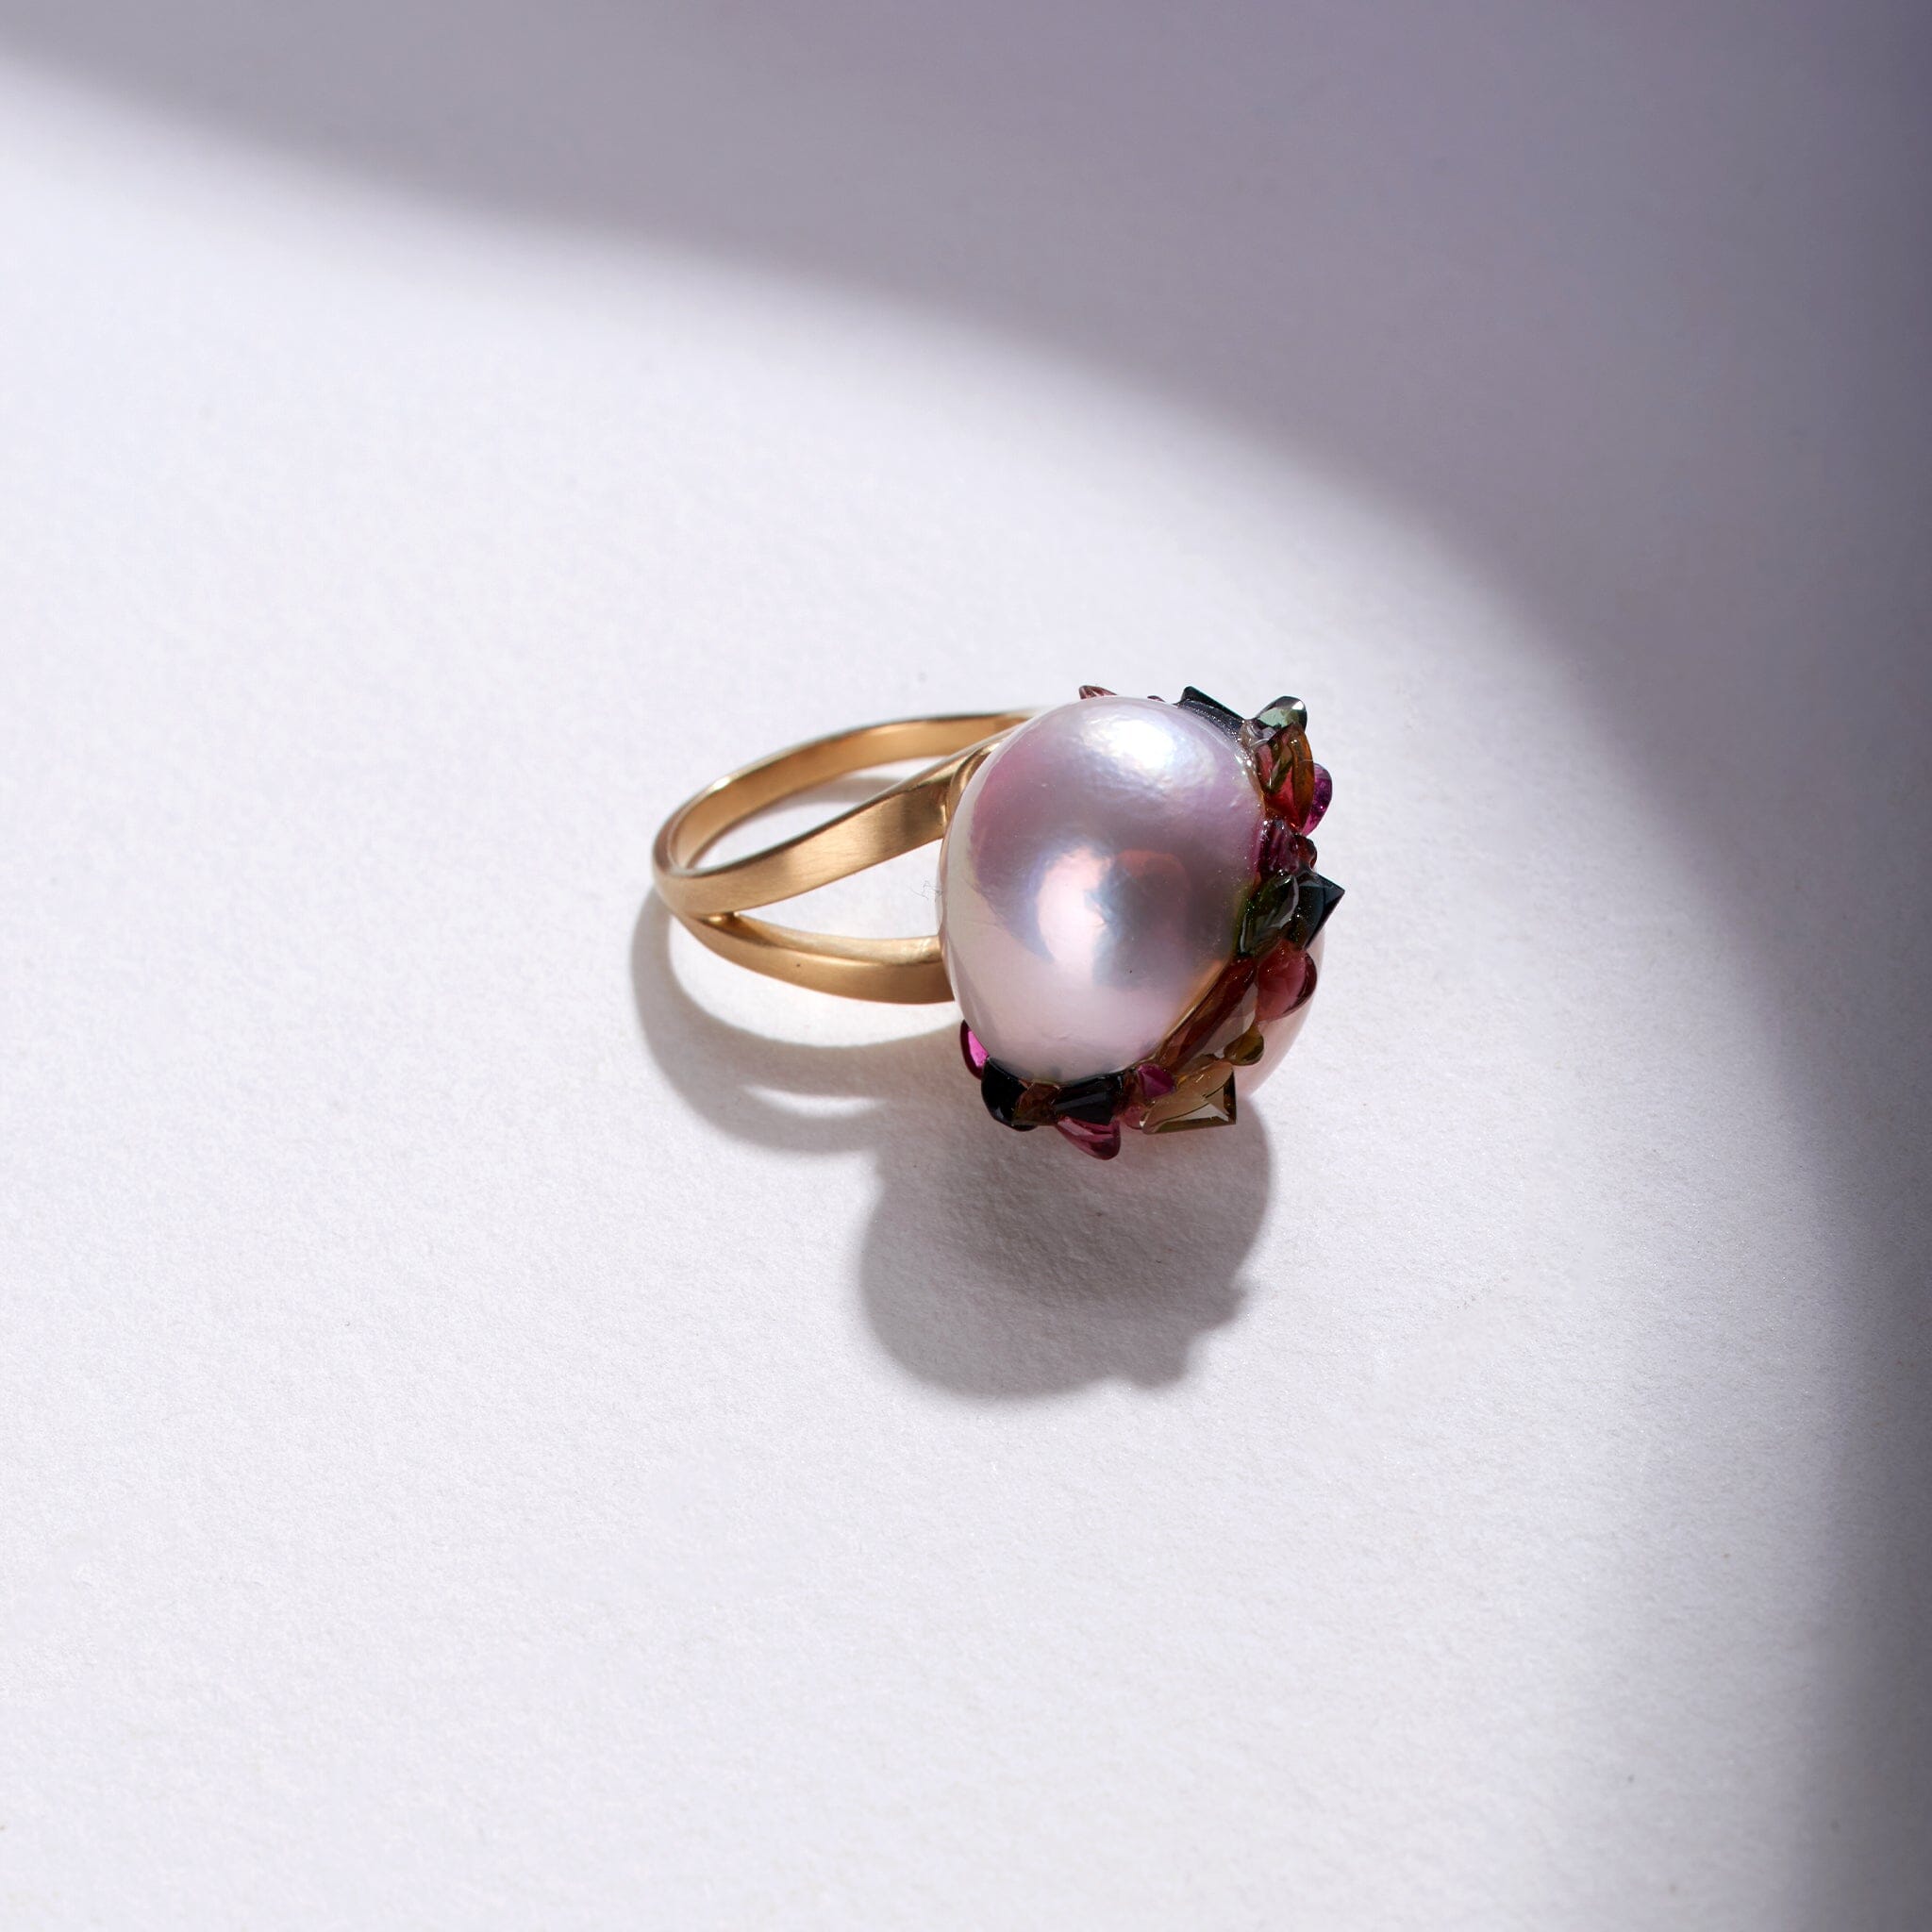 Freshwater Edison Pearl Spiral Ring with Tourmaline